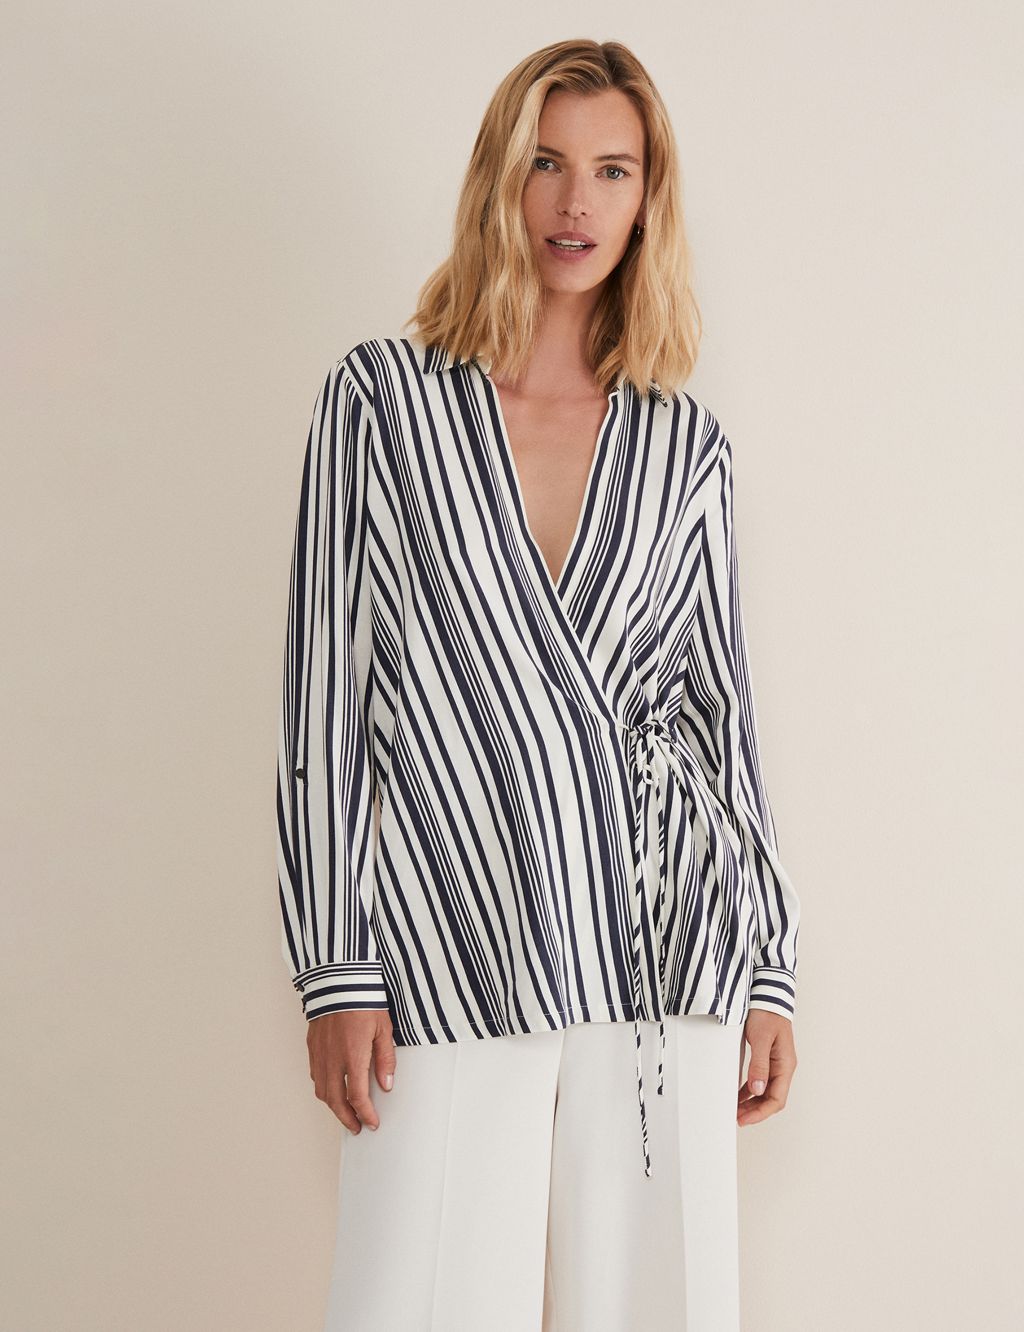 Striped Collared V-Neck Tie Front Blouse image 1